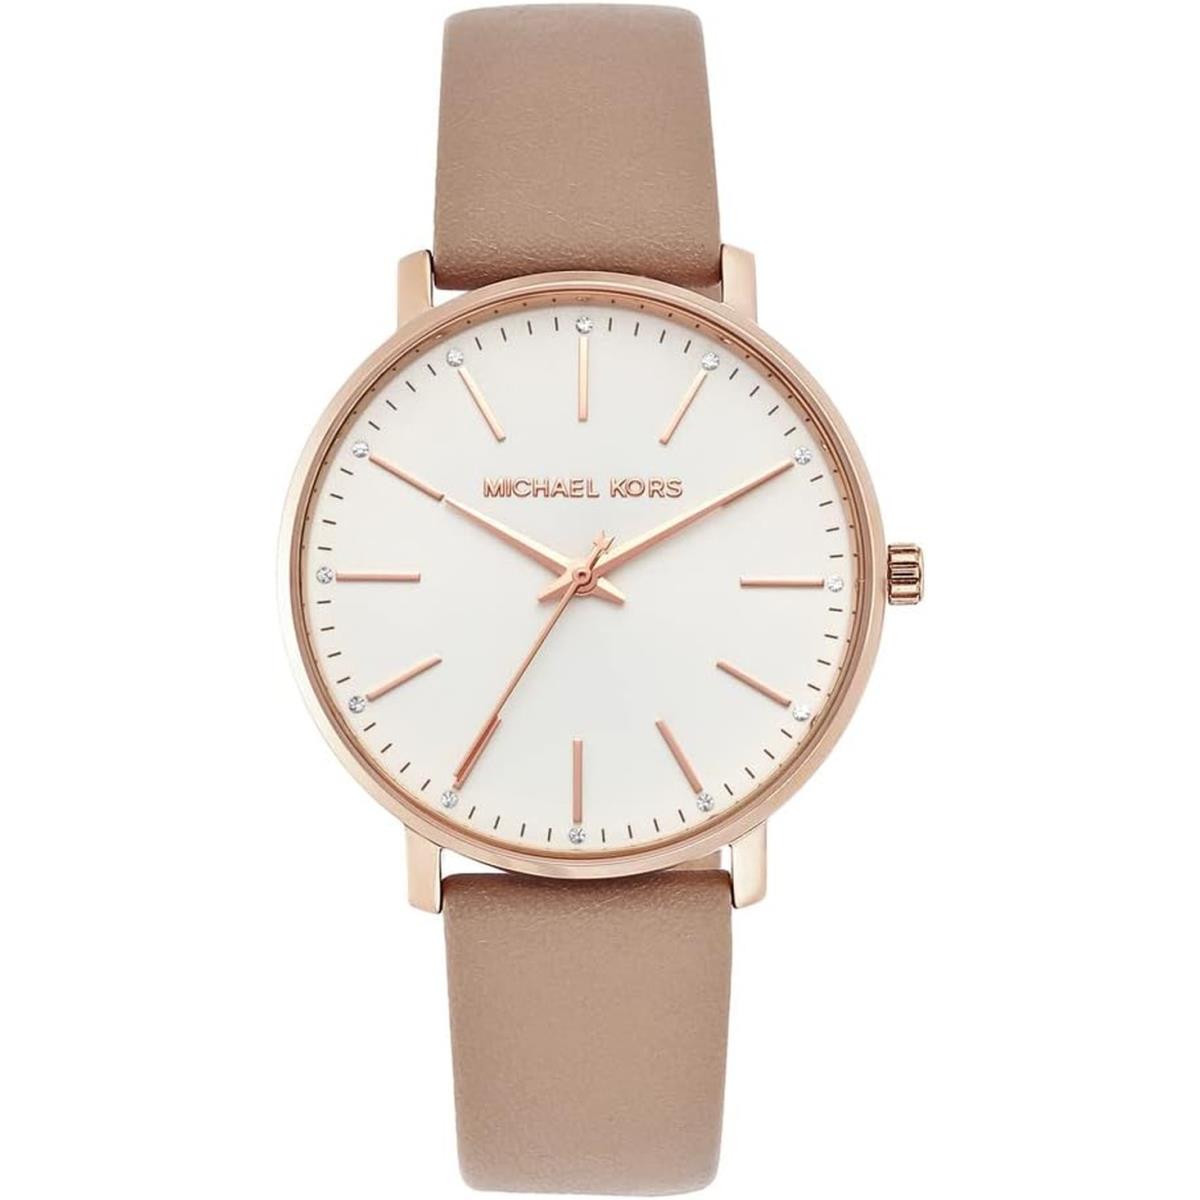 Michael Kors Pyper Stainless Steel Women`s 38mm Quartz Watch - Color Choices All Rose Gold/Nude